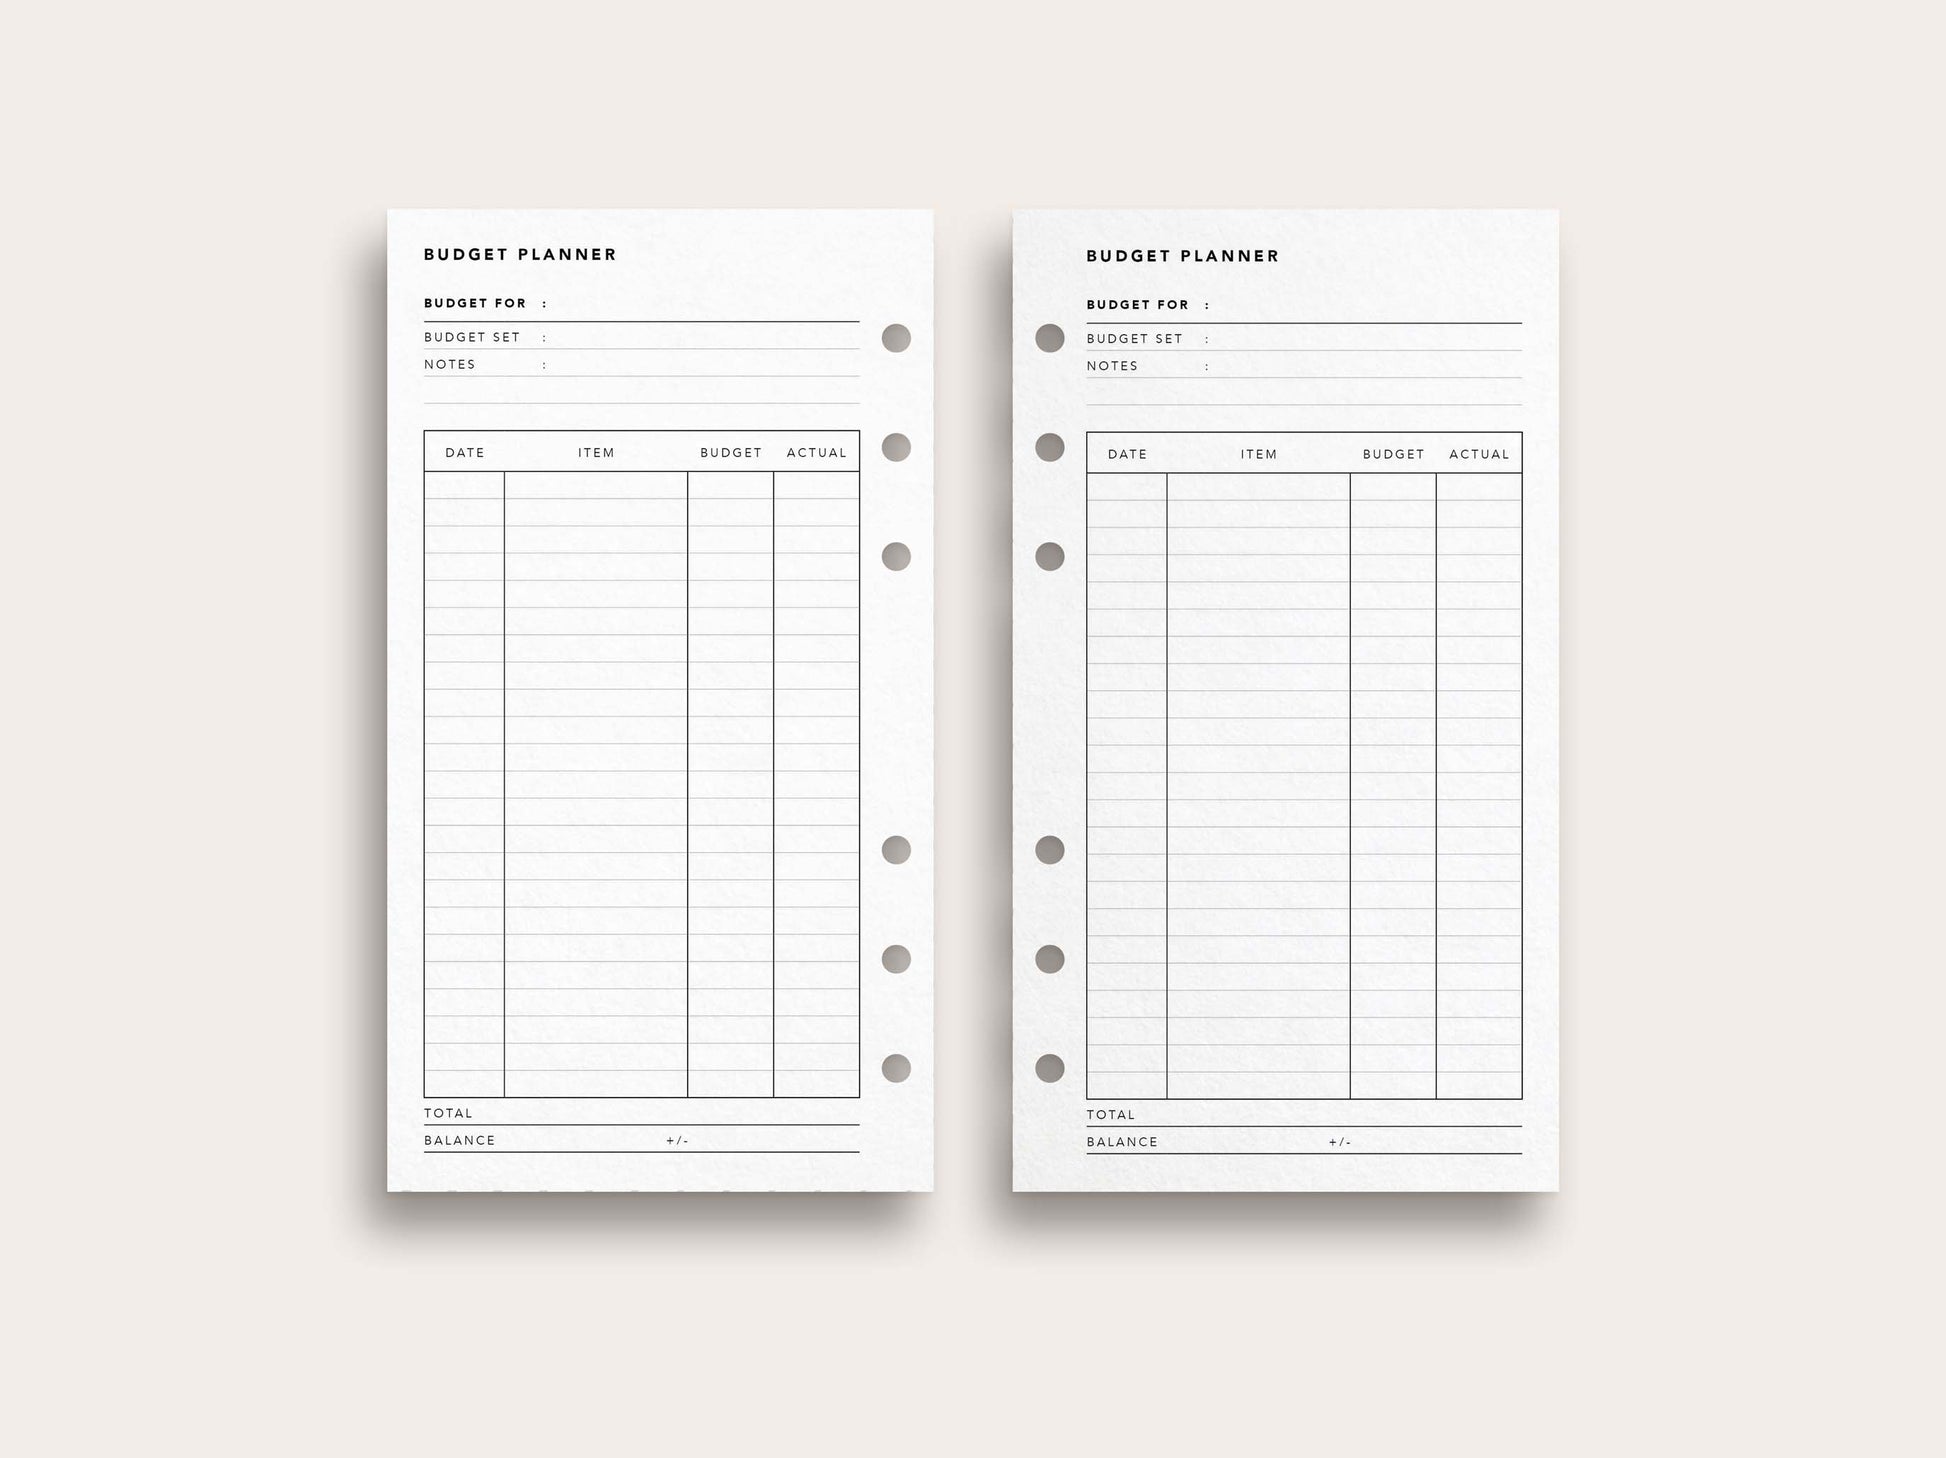 Printable Monthly Budget Planner, Budget Template, Finance Planner